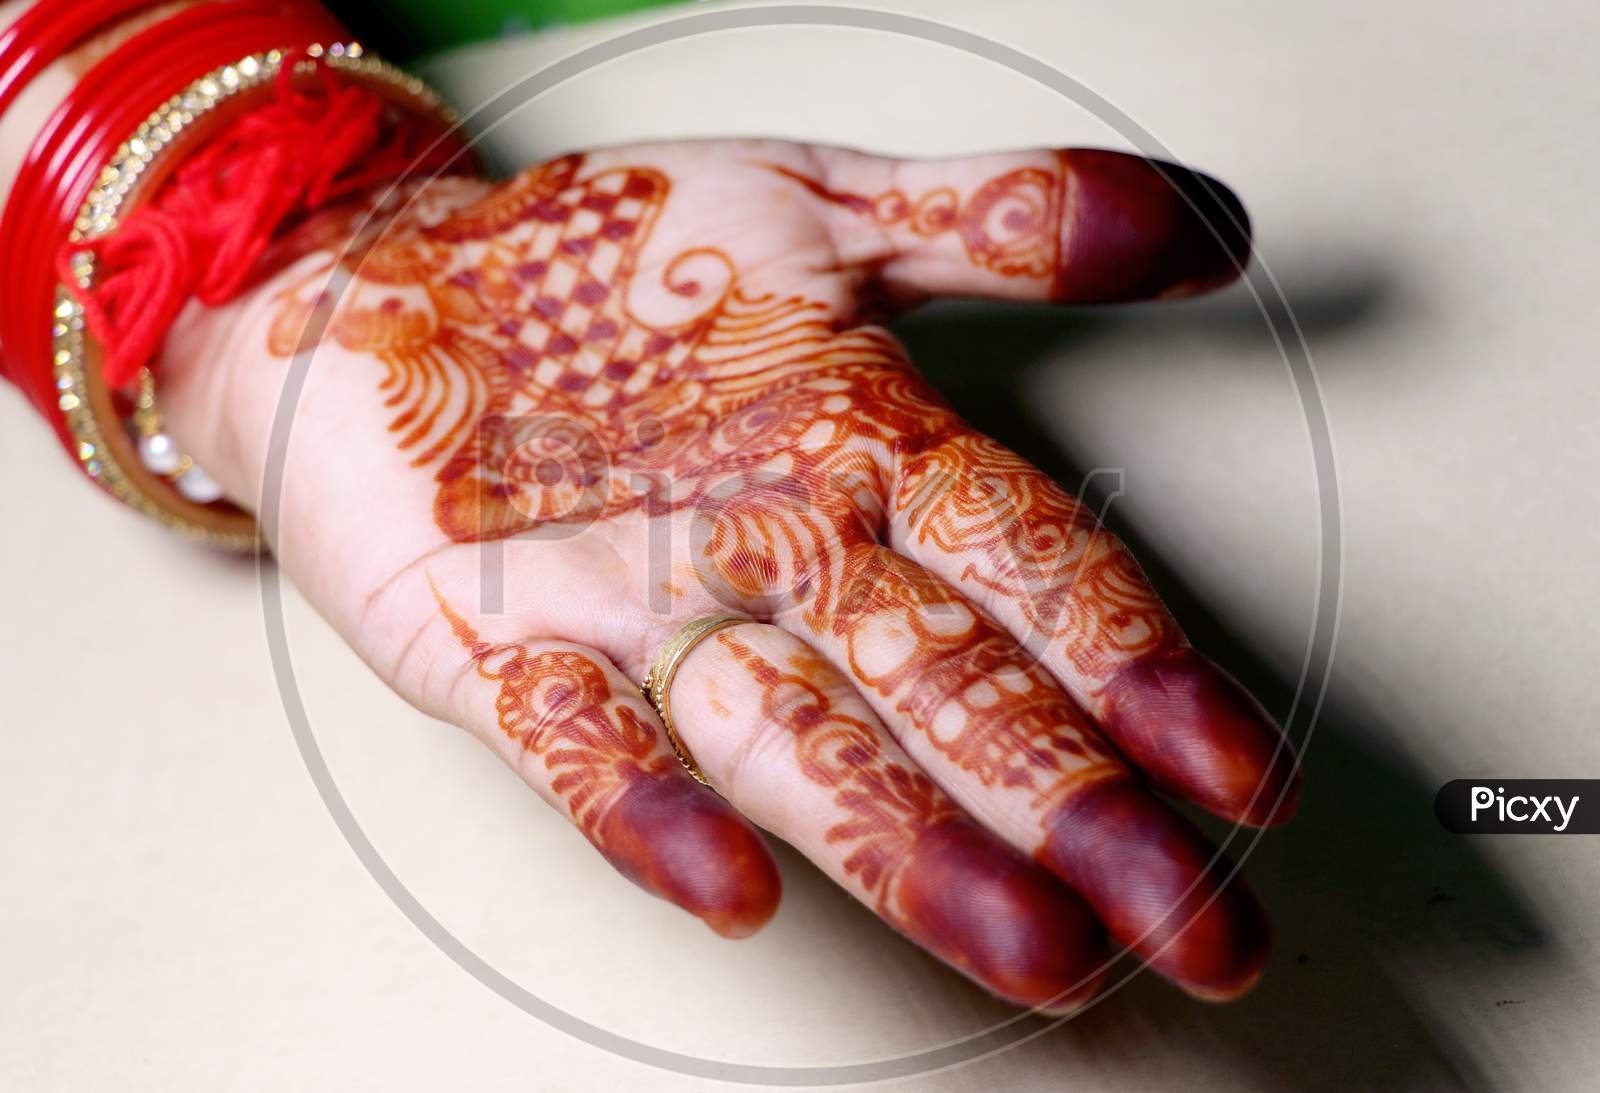 Art In Girls Hand Using Henna Plant Also Called As Mehndi Design,Style.It Is A Tradition In India.